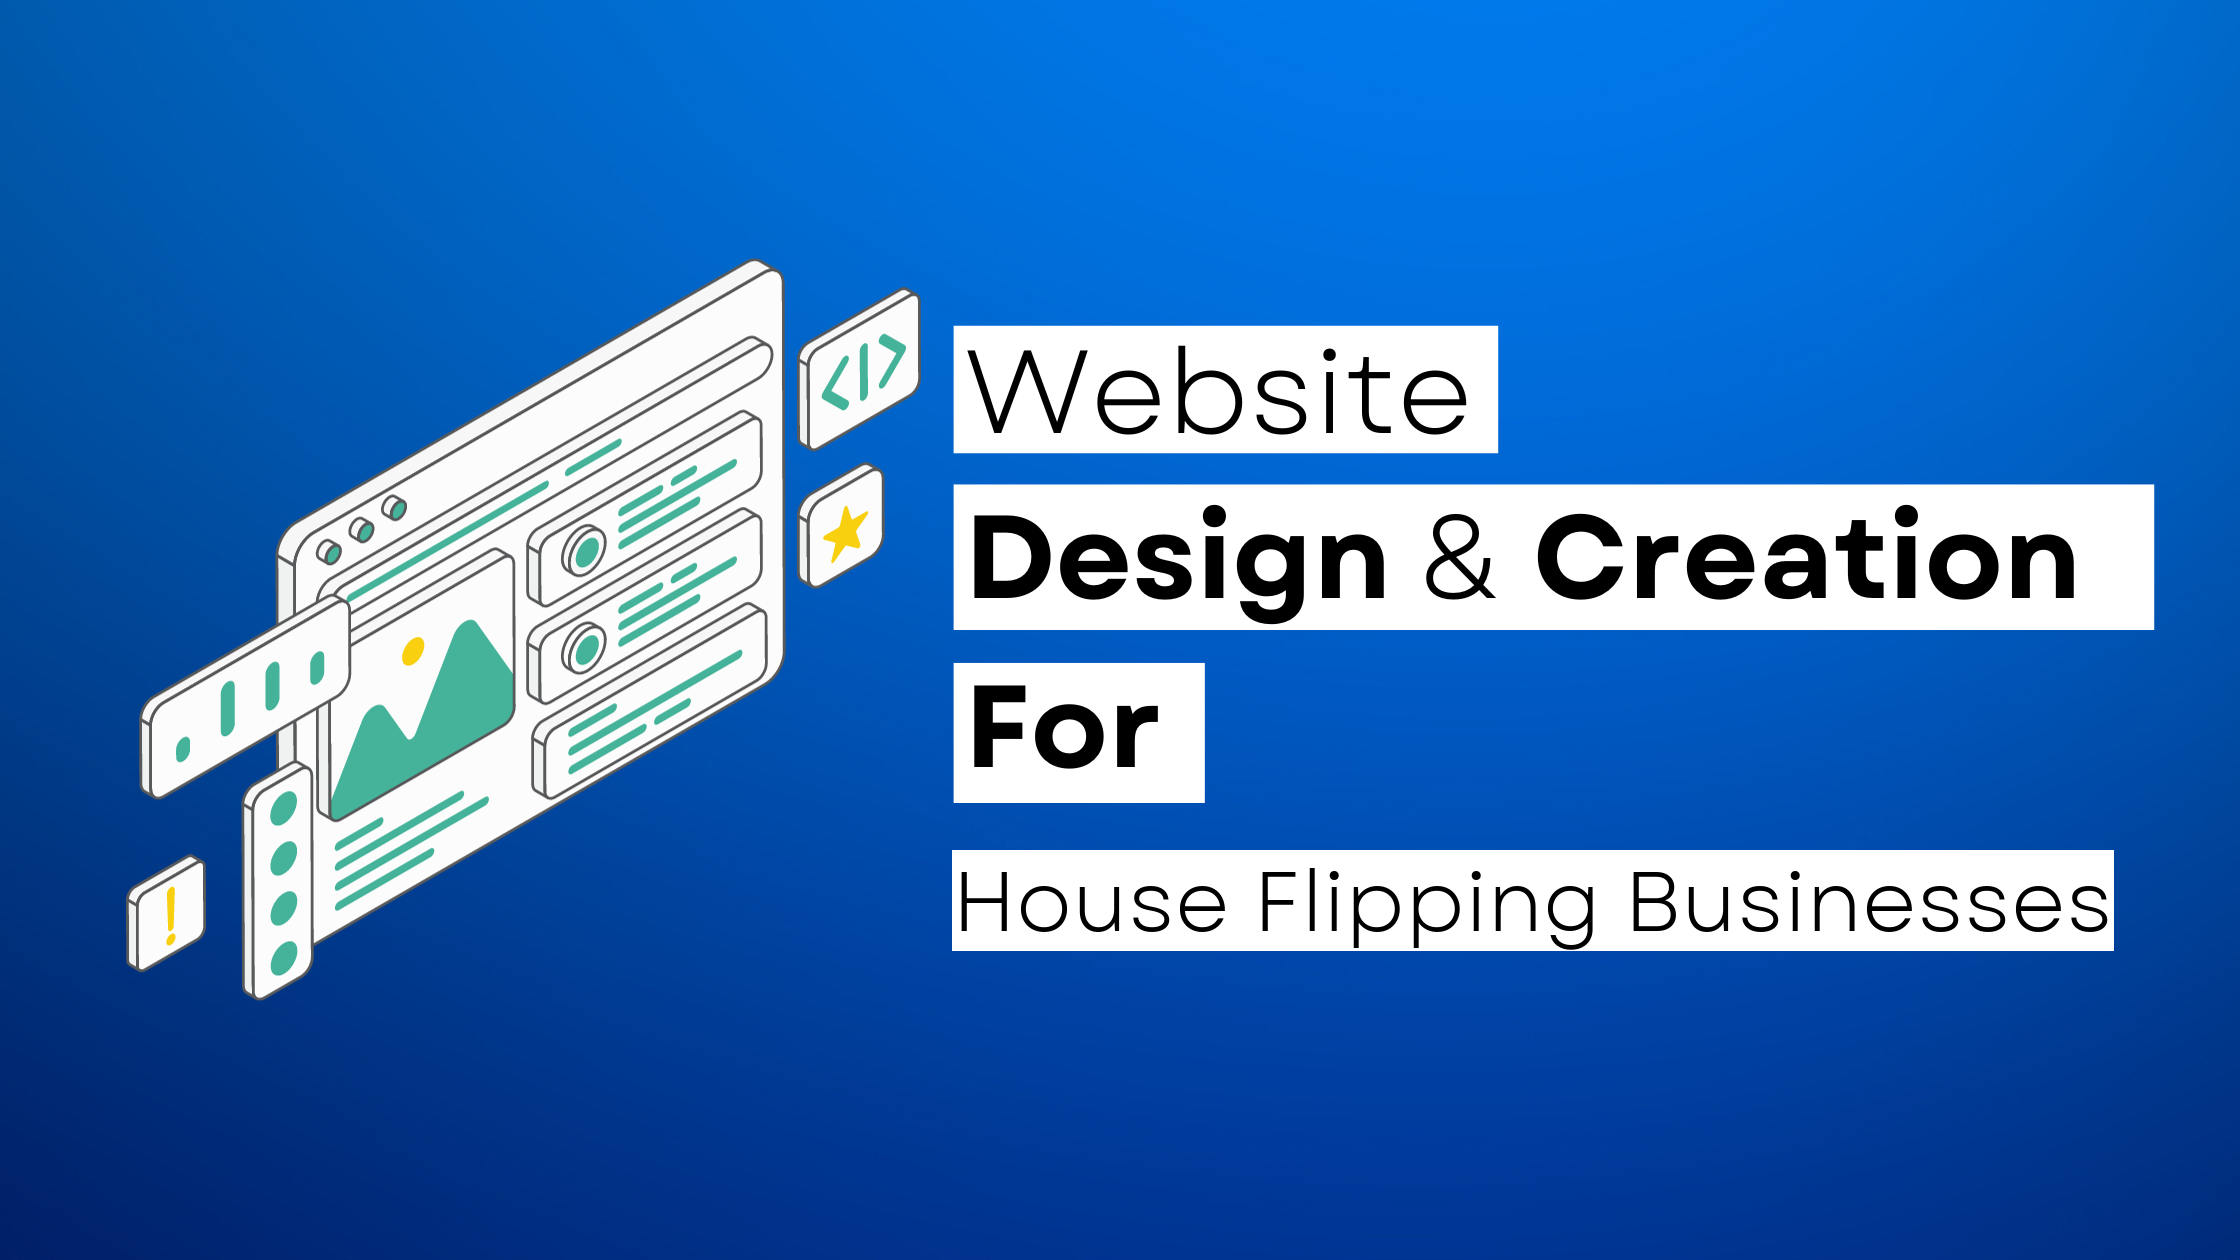 How to start a House Flipping website